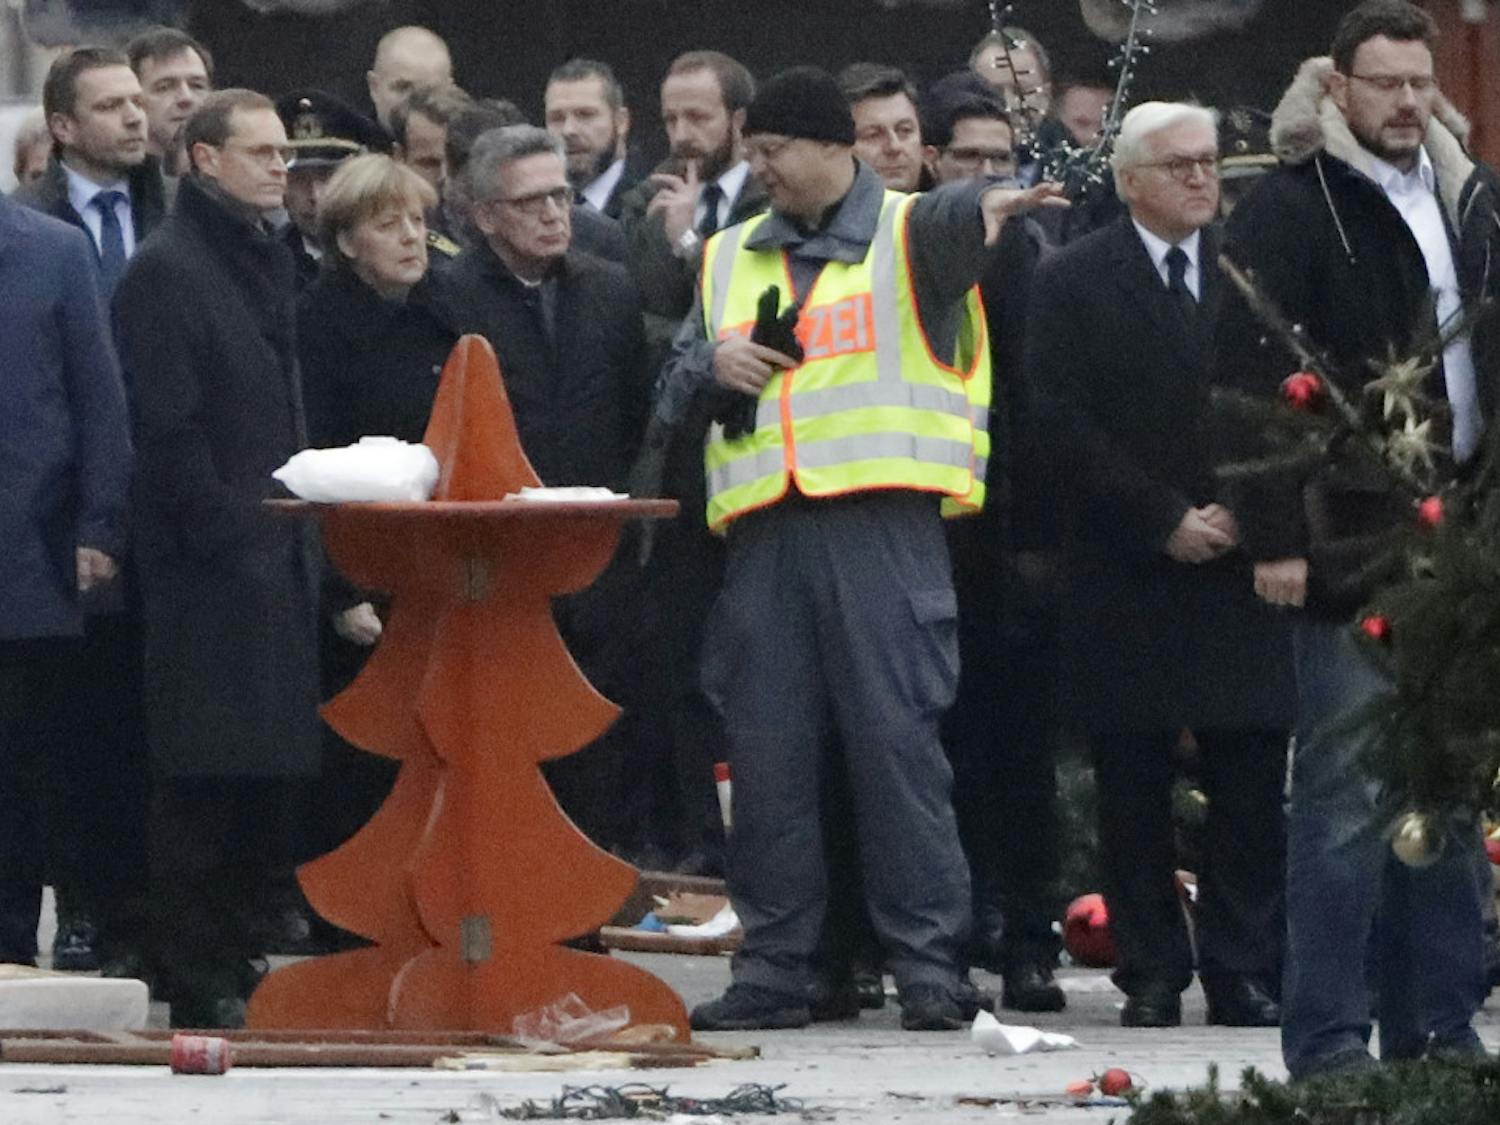 German Chancellor Angela Merkel, third from left, Interior Minister Thomas de Maiziere, fourth from left, and German Foreign Minister Frank-Walter Steinmeier, second from right, visit the site of the attack in Berlin, Germany, Tuesday, Dec. 20, 2016, the day after a truck ran into a crowded Christmas market and killed several people. 